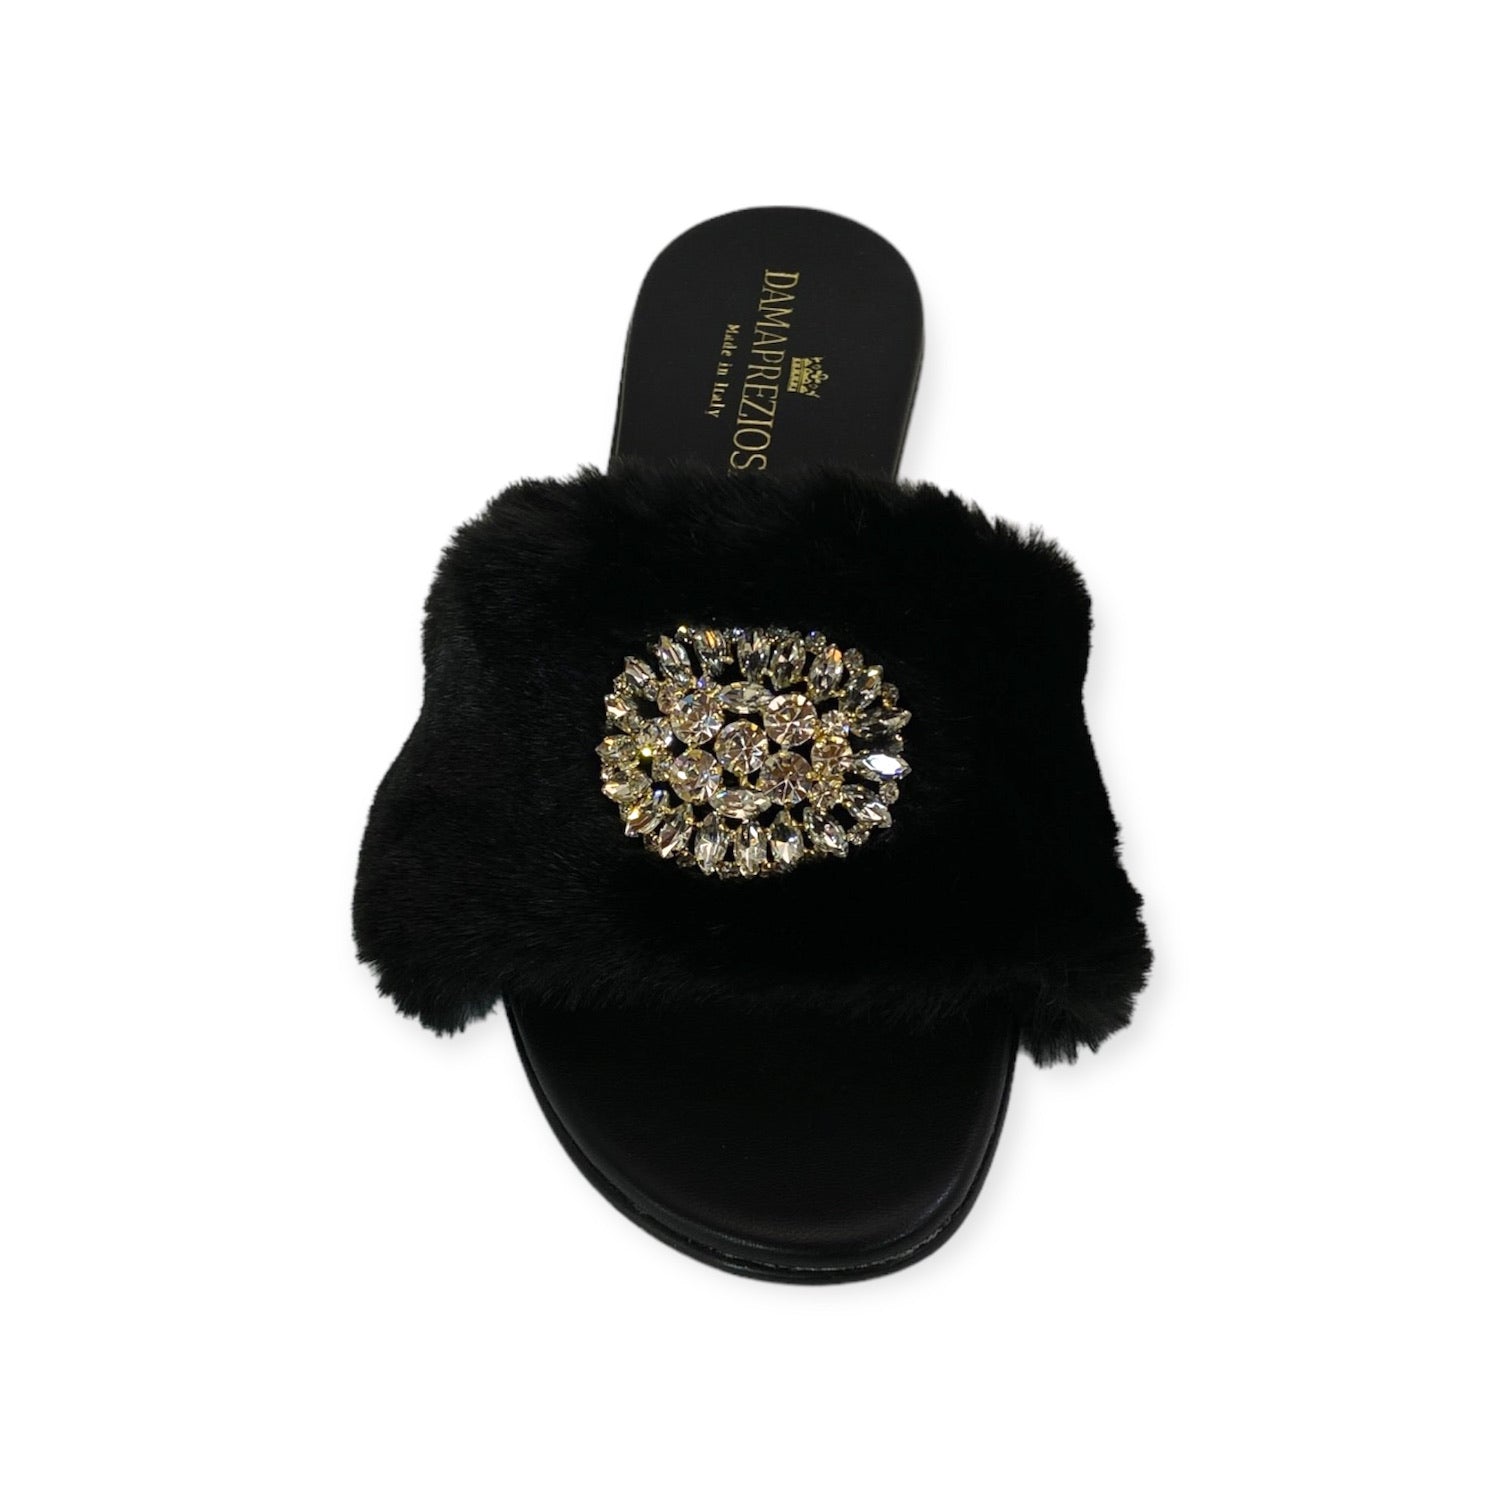 Victoria flat mule in black faux fur with crystals